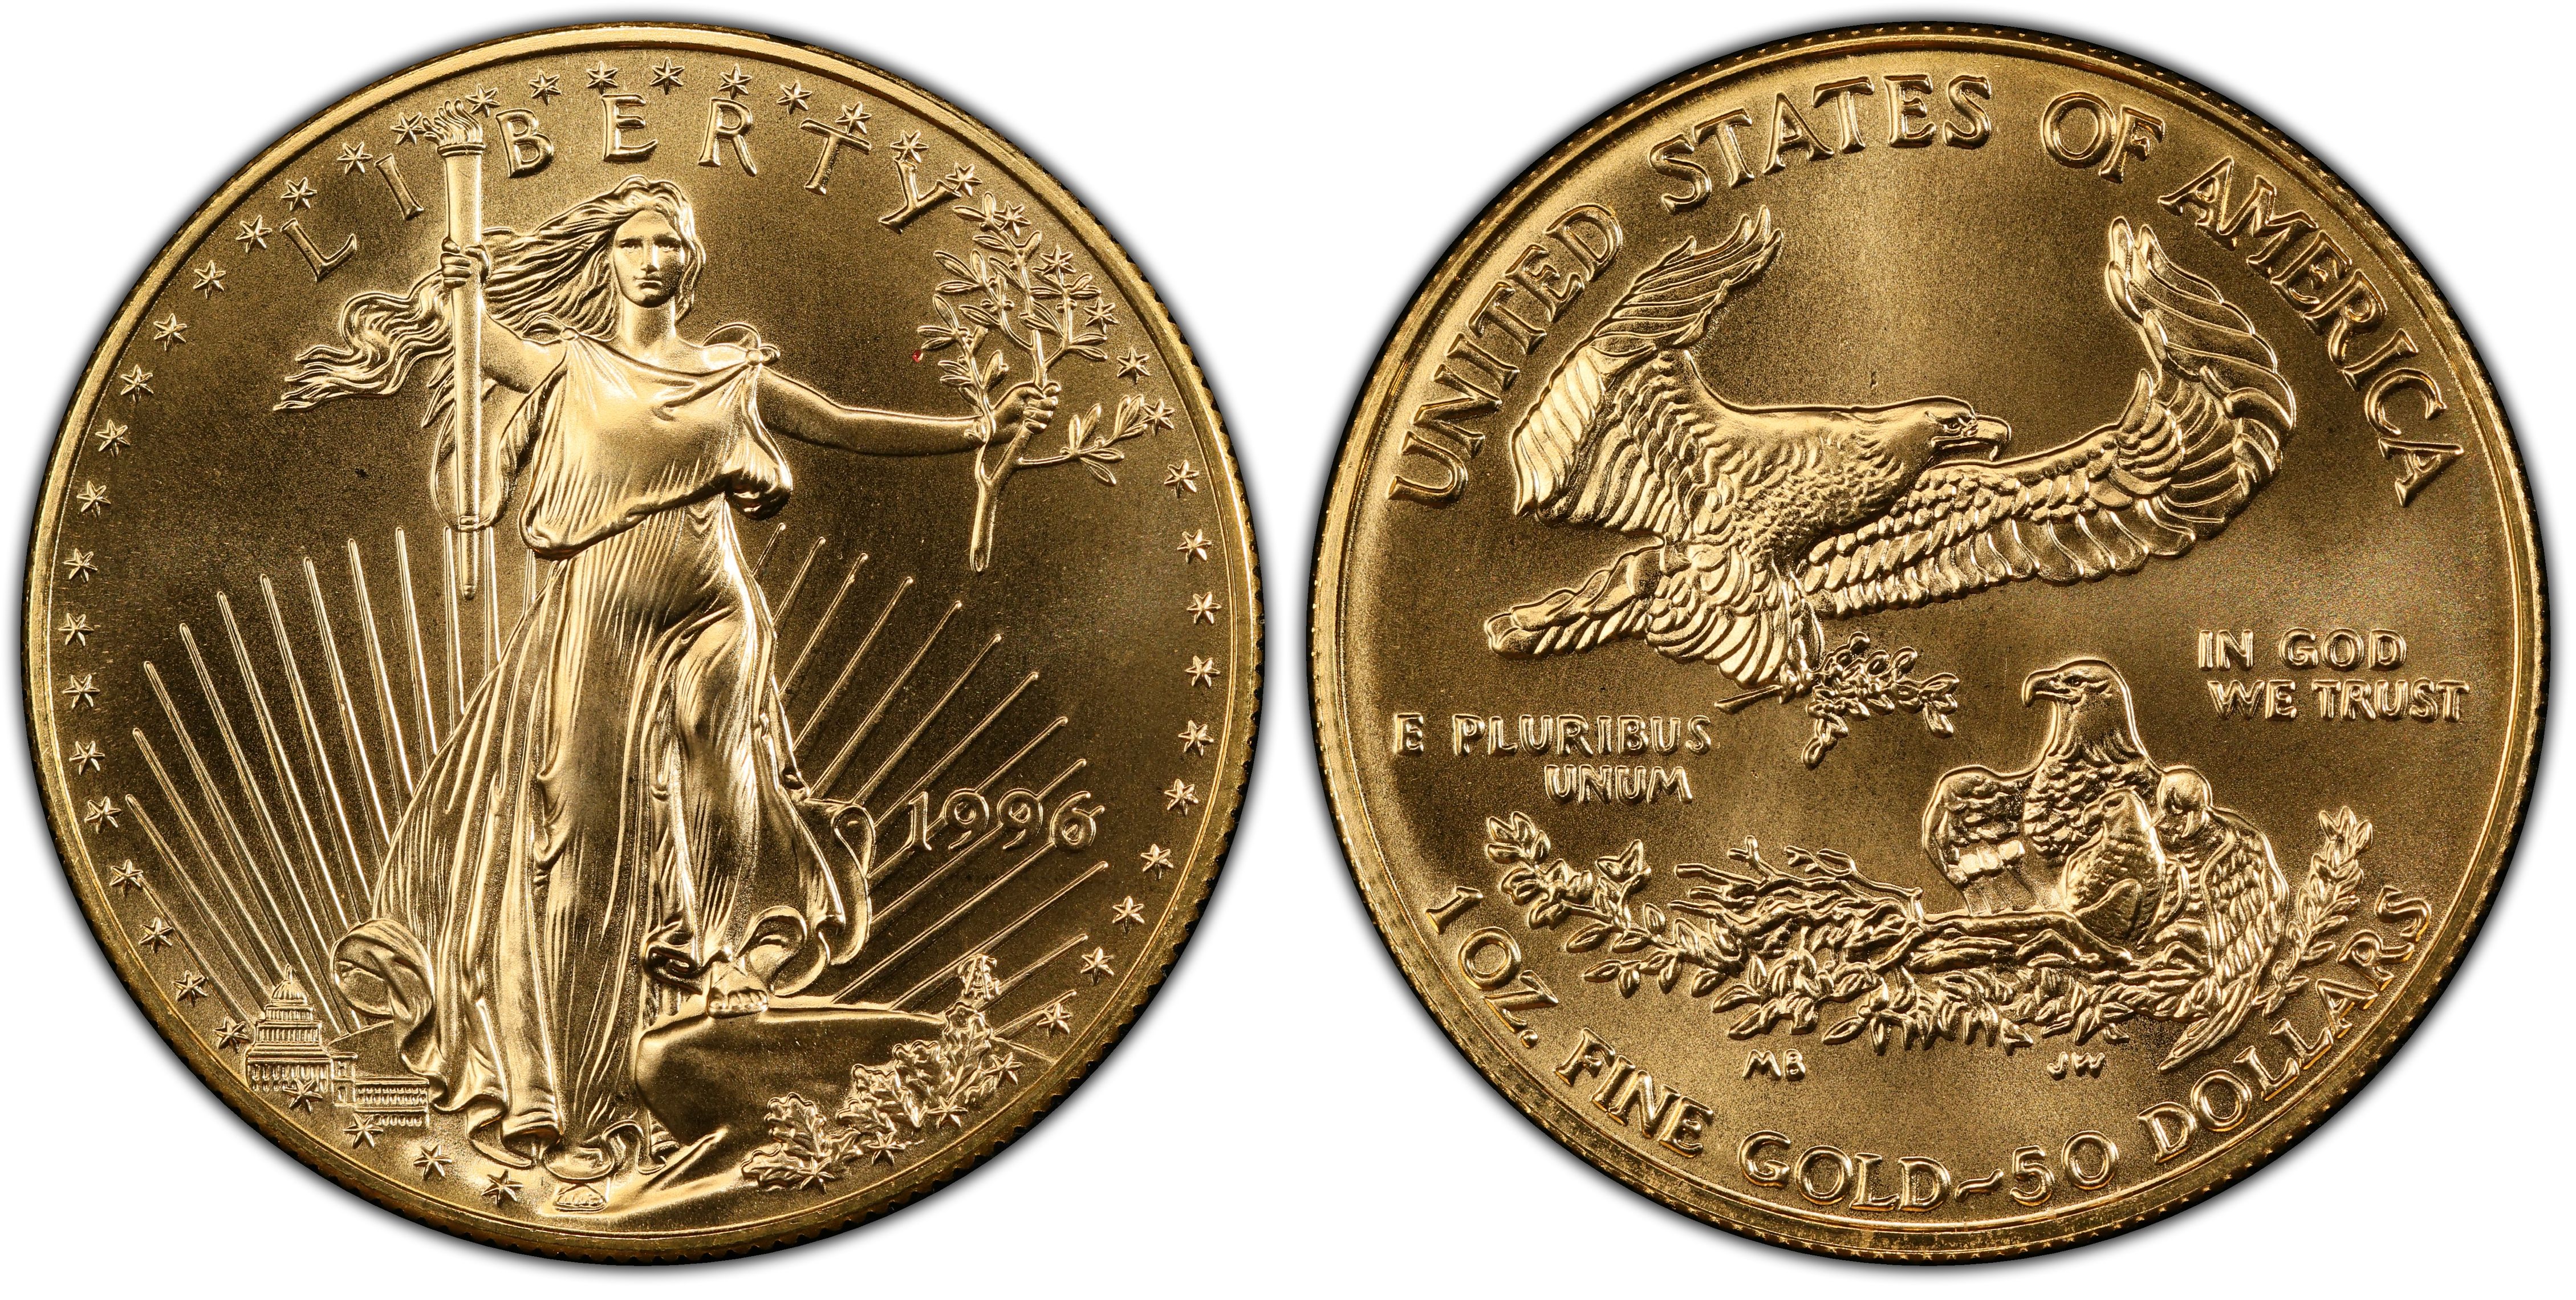 1996 $50 Gold Eagle (Regular Strike) Gold Eagles - PCGS CoinFacts